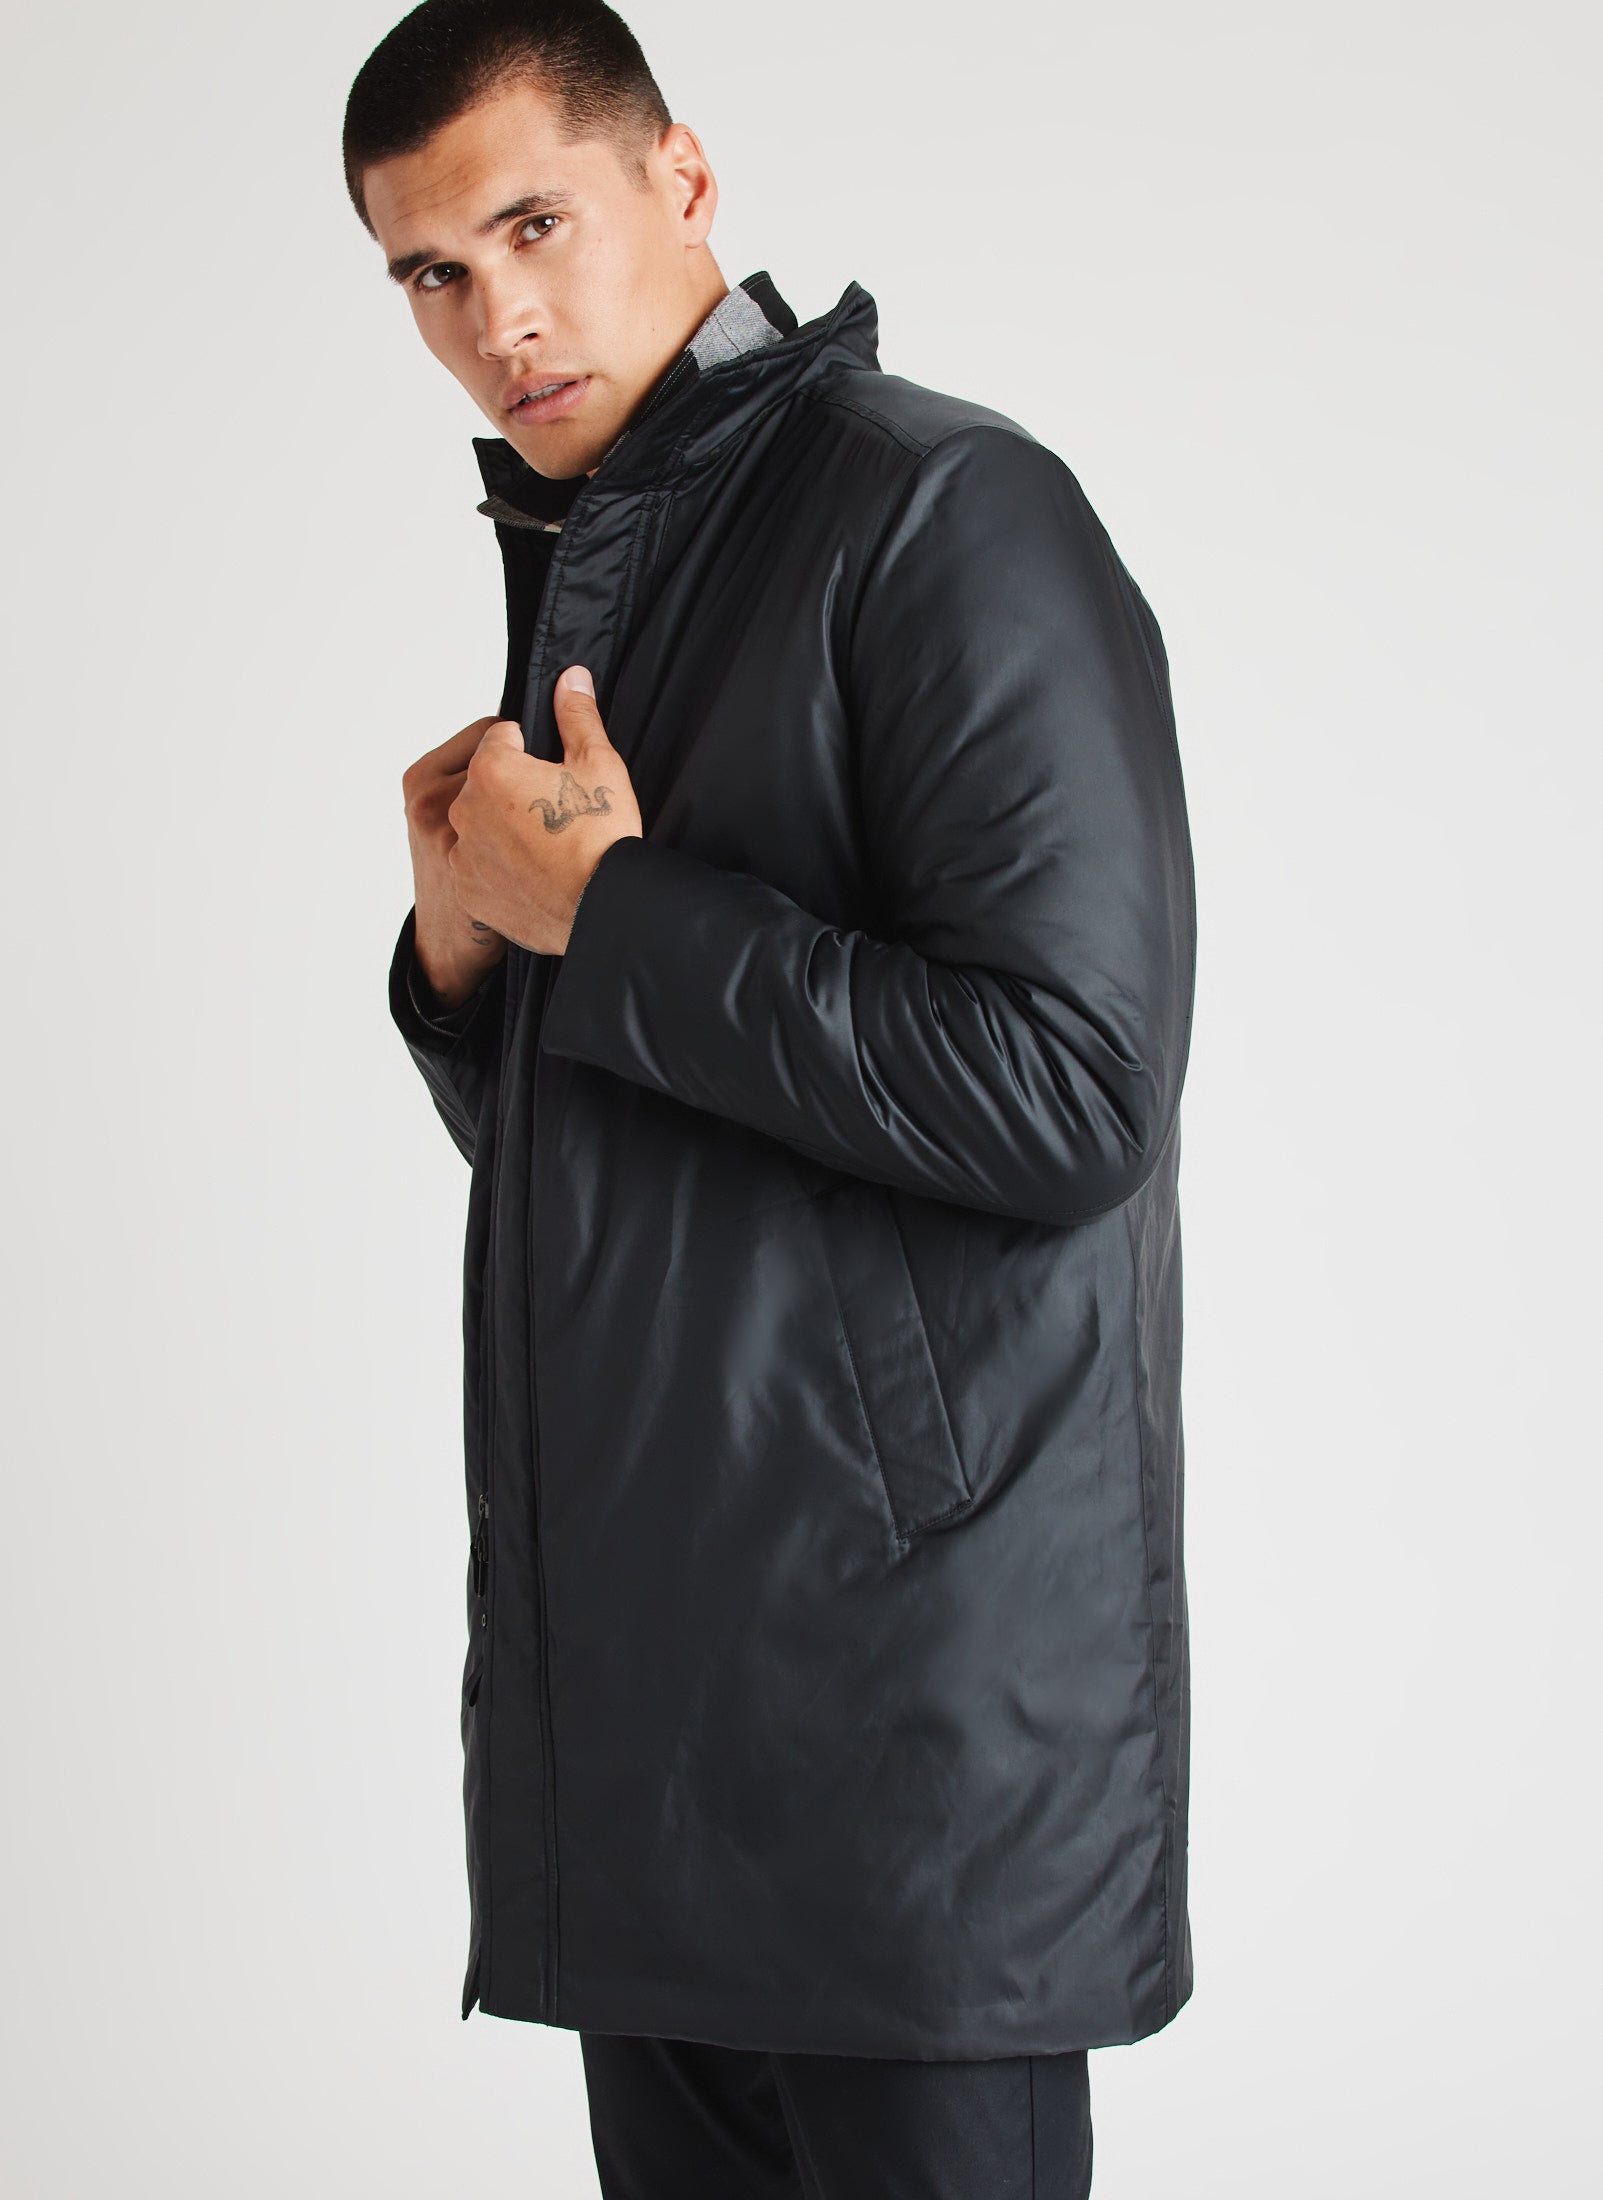 Stellar Insulated Coat | Men's Jackets and Blazers – Kit and Ace